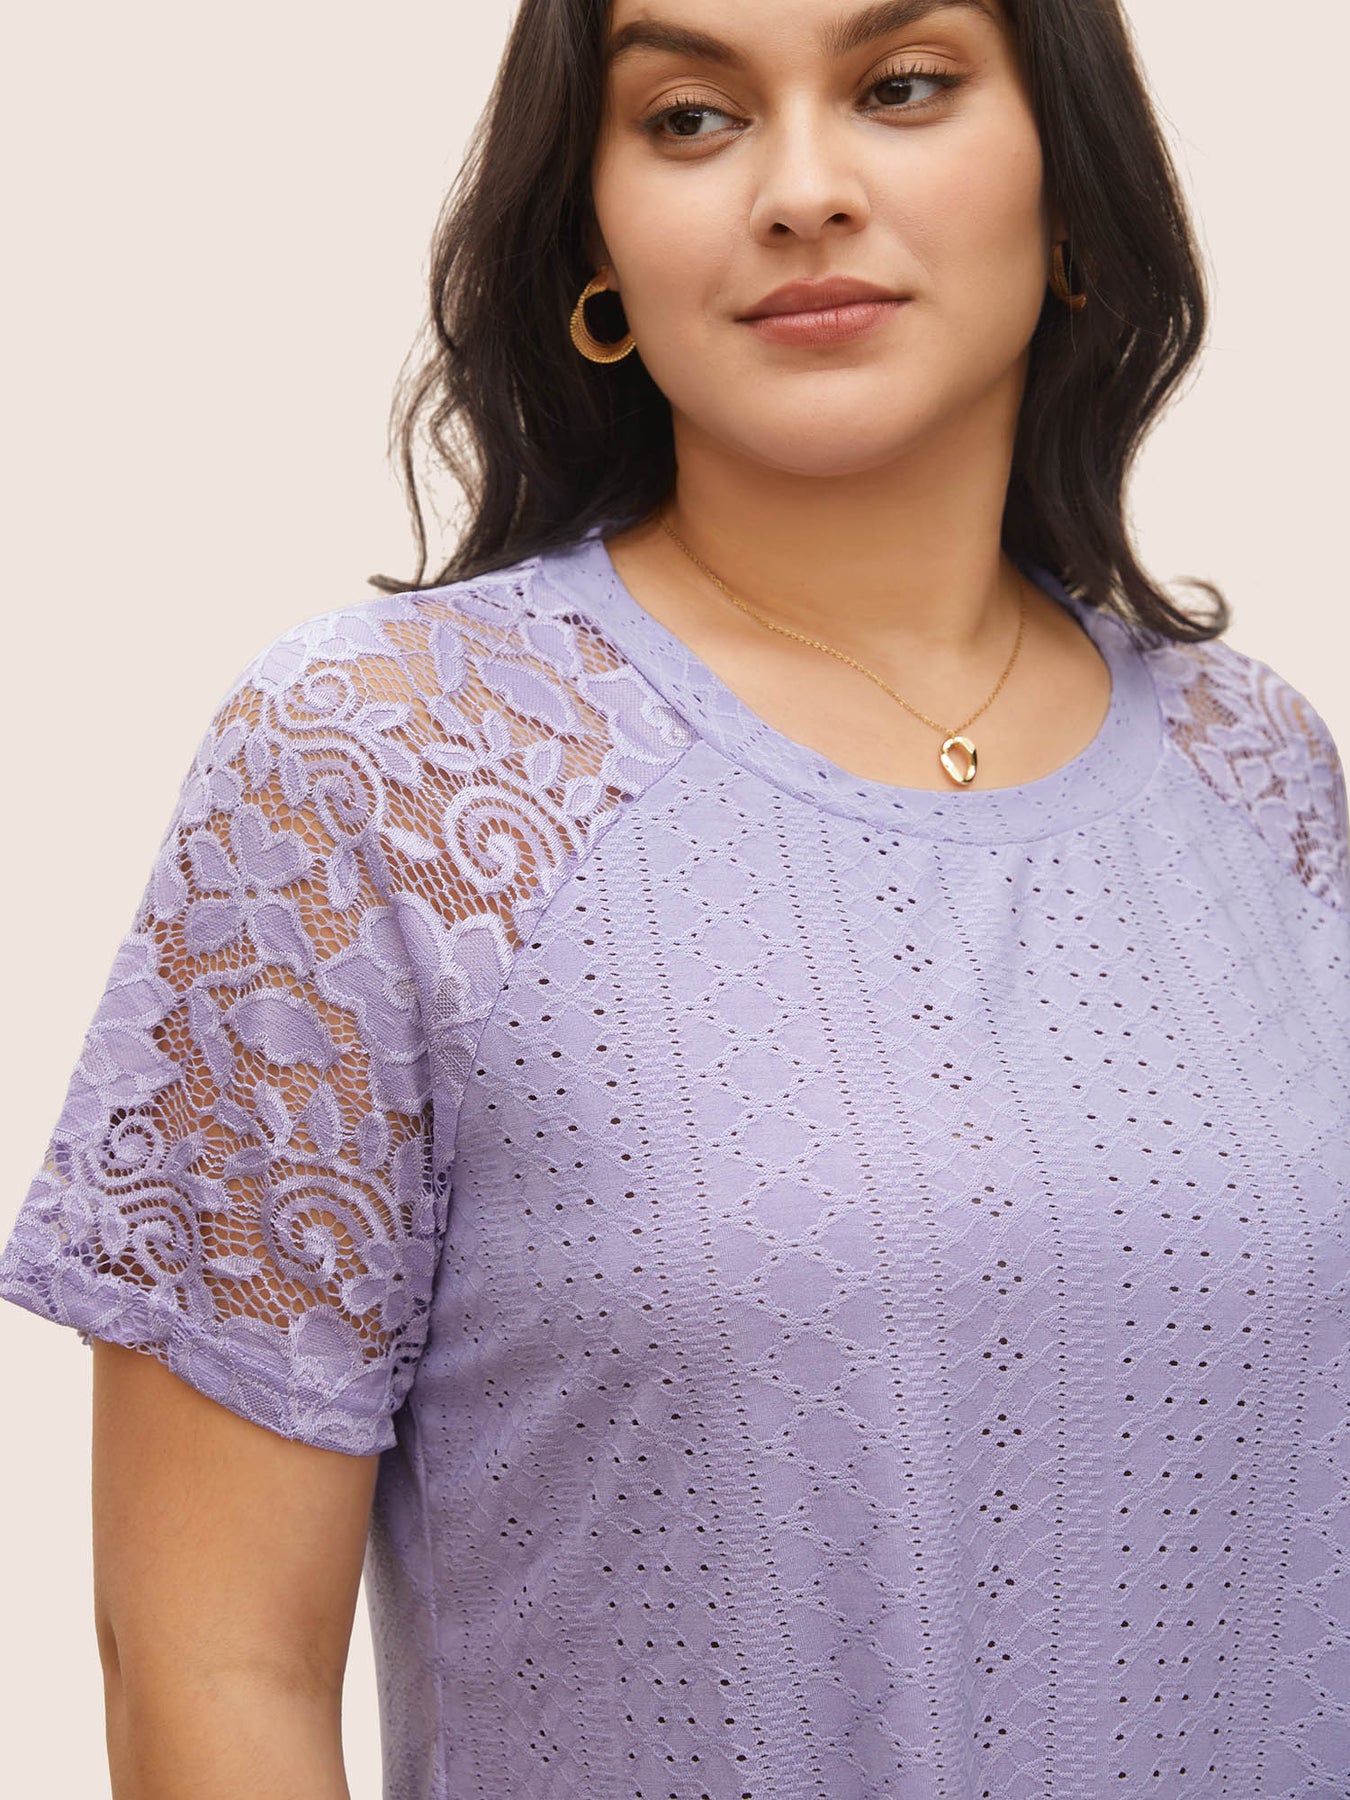 Plus Size T-shirts | Solid Broderie Anglaise Lace Raglan Sleeve T-shirt ...